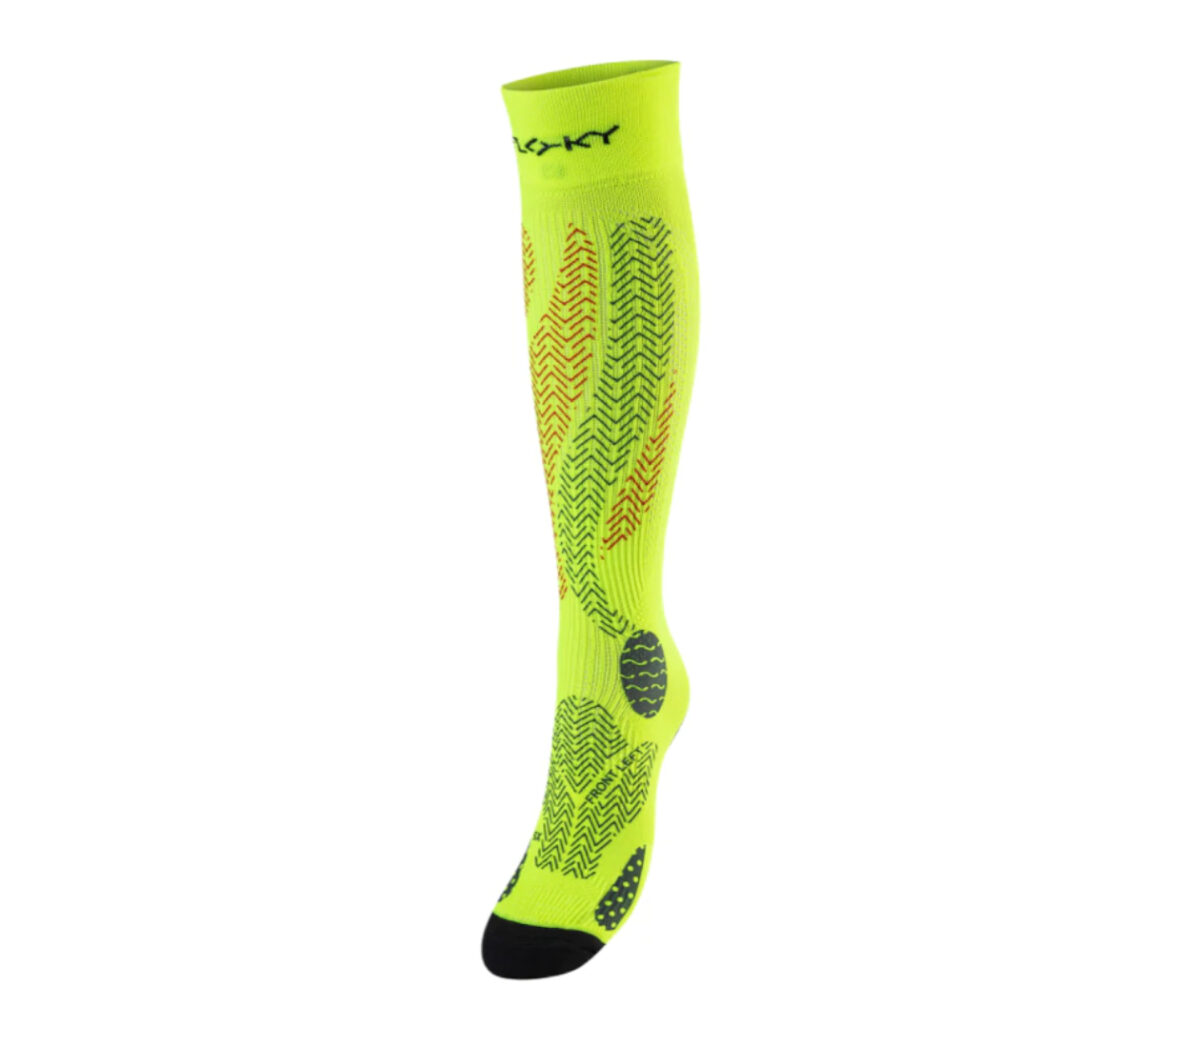 Calza Floky t-trail long giallo fluo